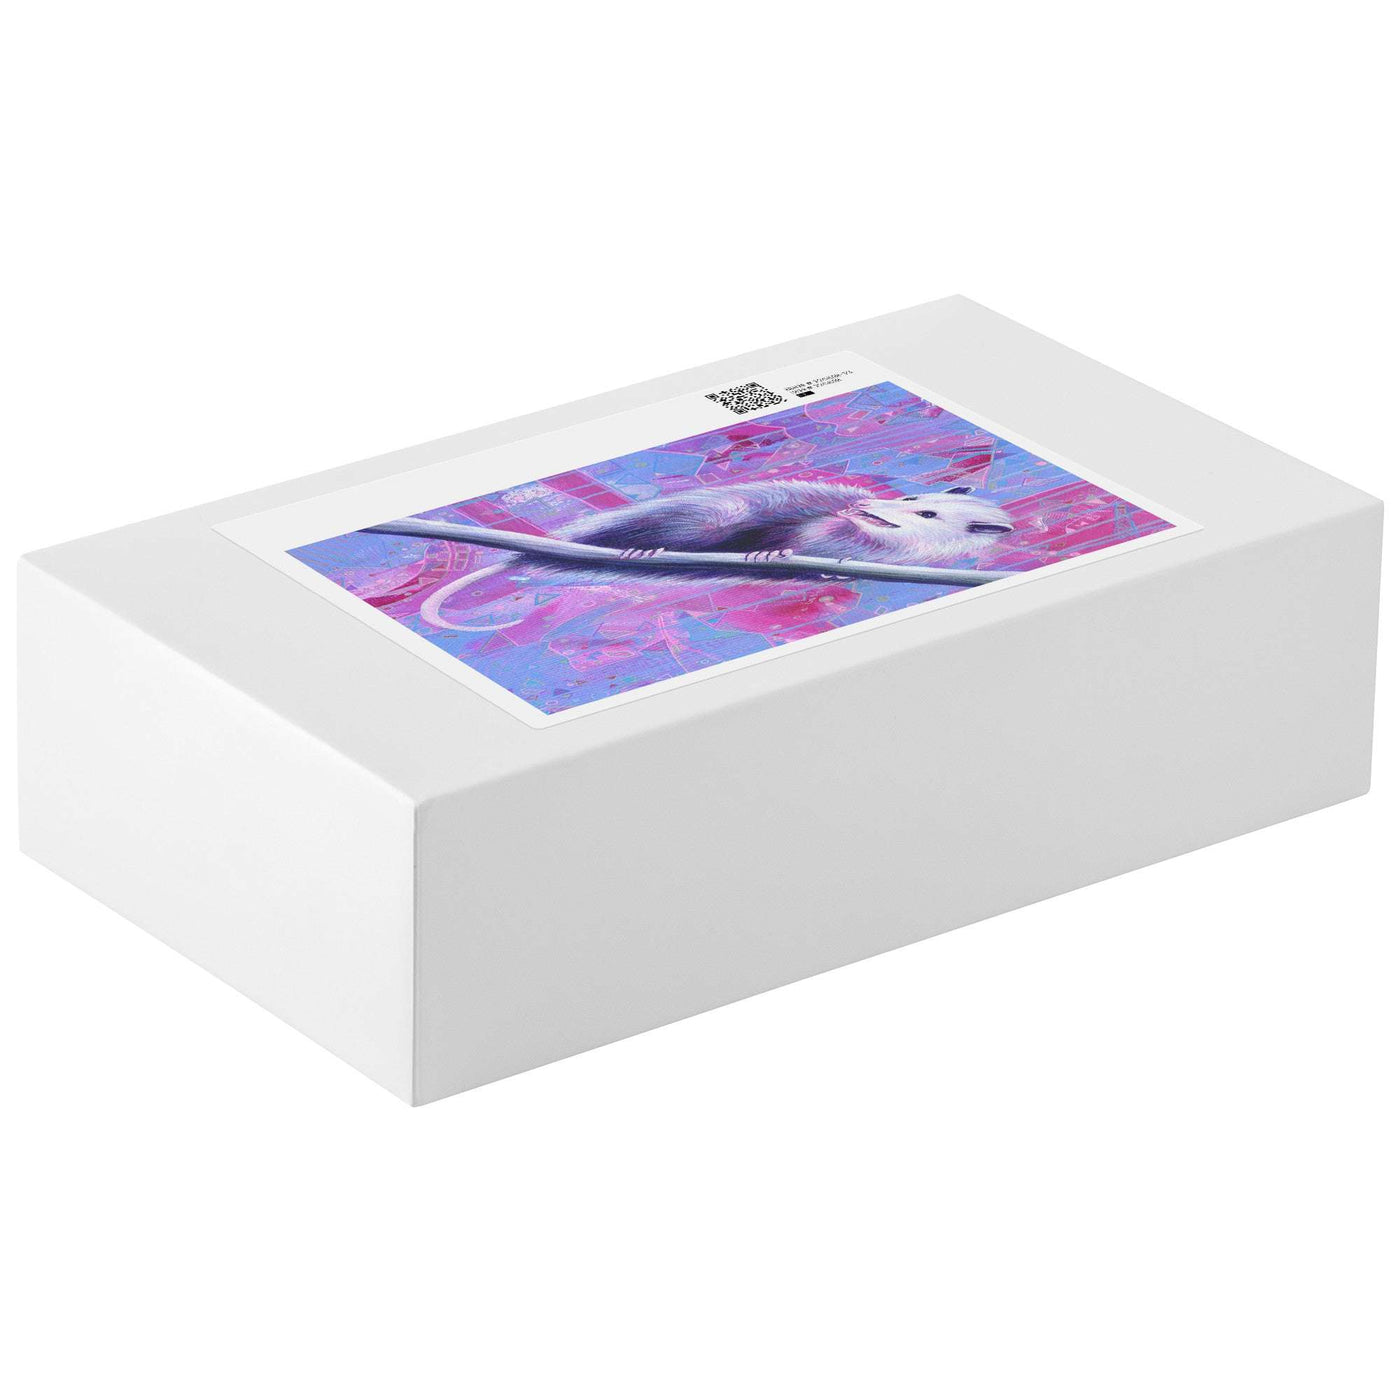 White Opossum Puzzle box with a colorful abstract design on the label, featuring a opossum with a background of swirls in shades of pink and purple.